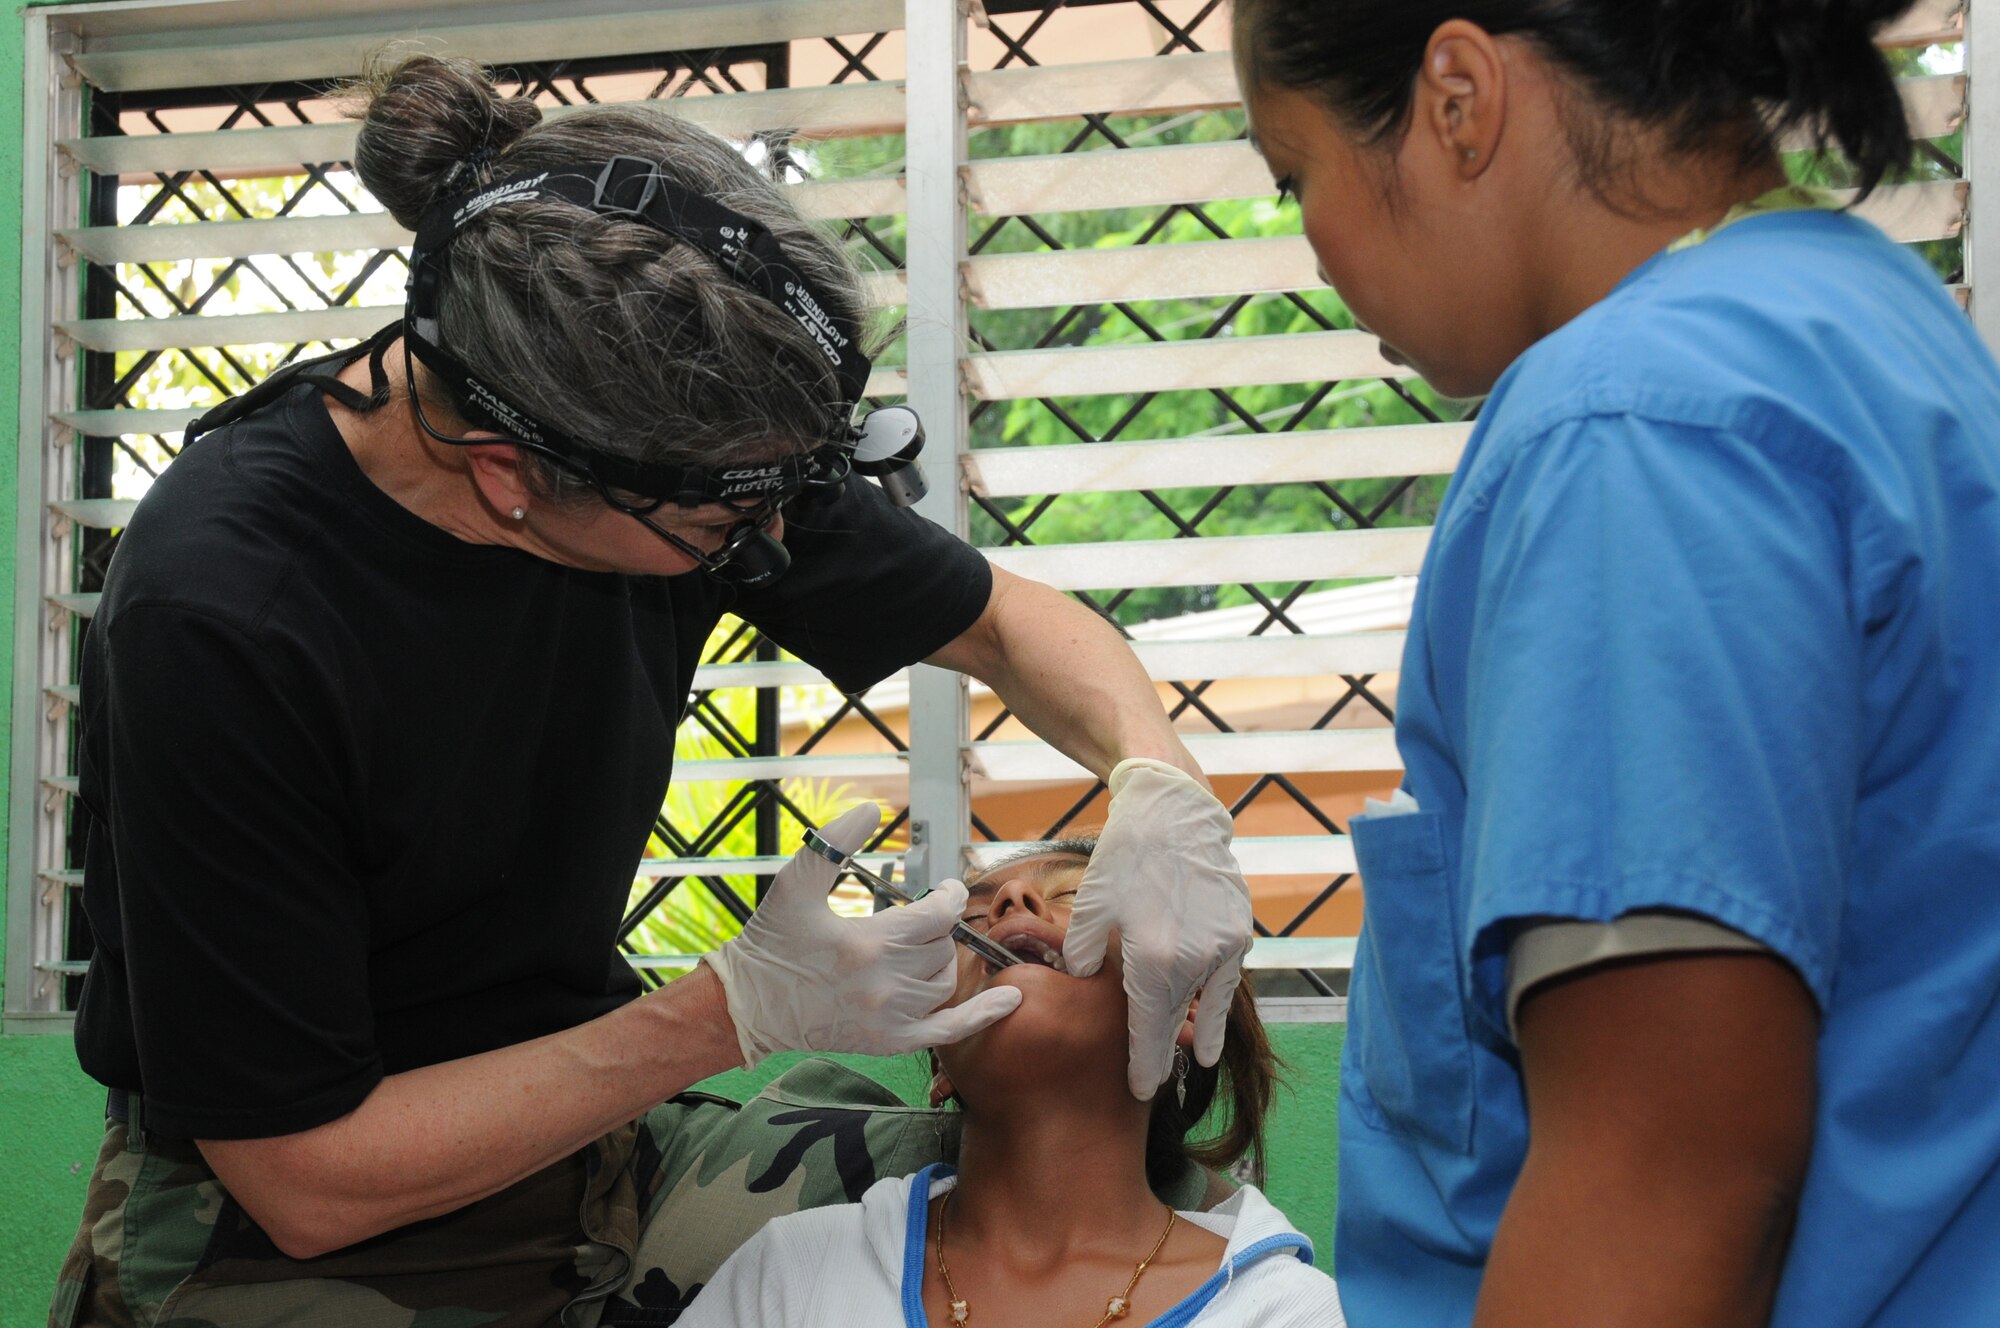 Lt. Col. Frances McClure, a dentist with the 916th Aerospace Medicine Squadron in North Carolina, numbs a patient prior to a tooth extraction here Aug. 8, 2011 as part of a humanitarian mission called a Medical Readiness Training Exercise (MEDRETE). The dental clinic pulled nearly 950 teeth during the two-week deployment. (USAF photo by Senior Airman Meredith A. H. Thomas, 916 ARW/PA)